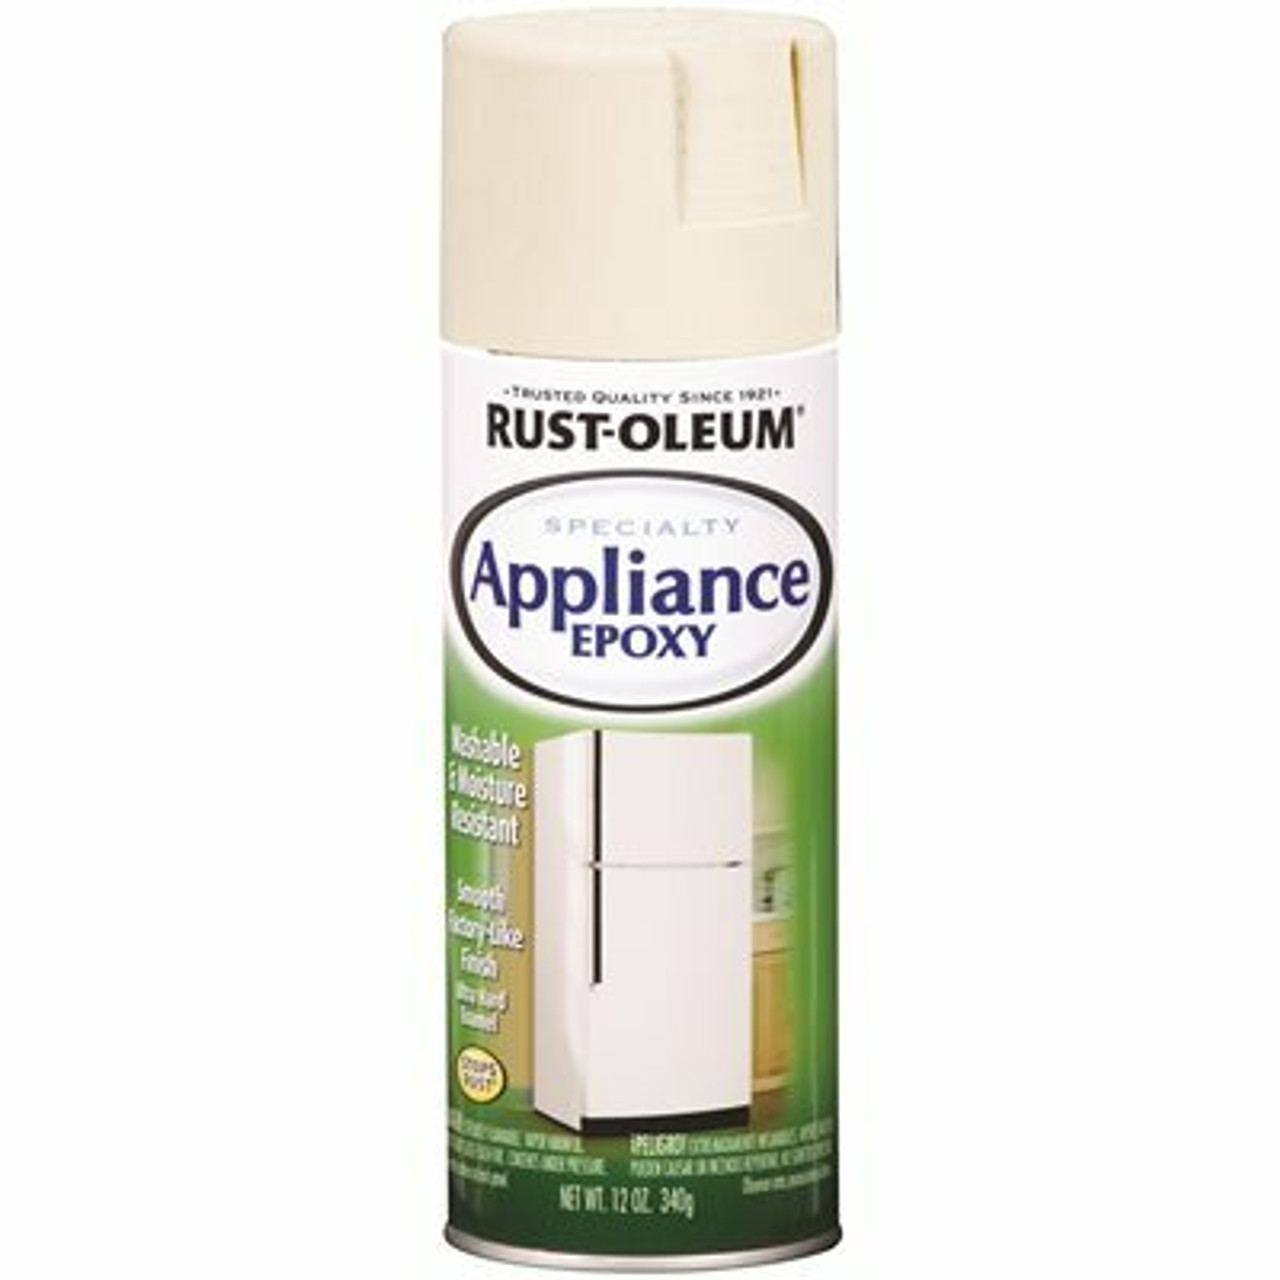 Rust-Oleum Specialty 12 Oz. Appliance Epoxy Gloss Biscuit Spray Paint (6 Per Pack)